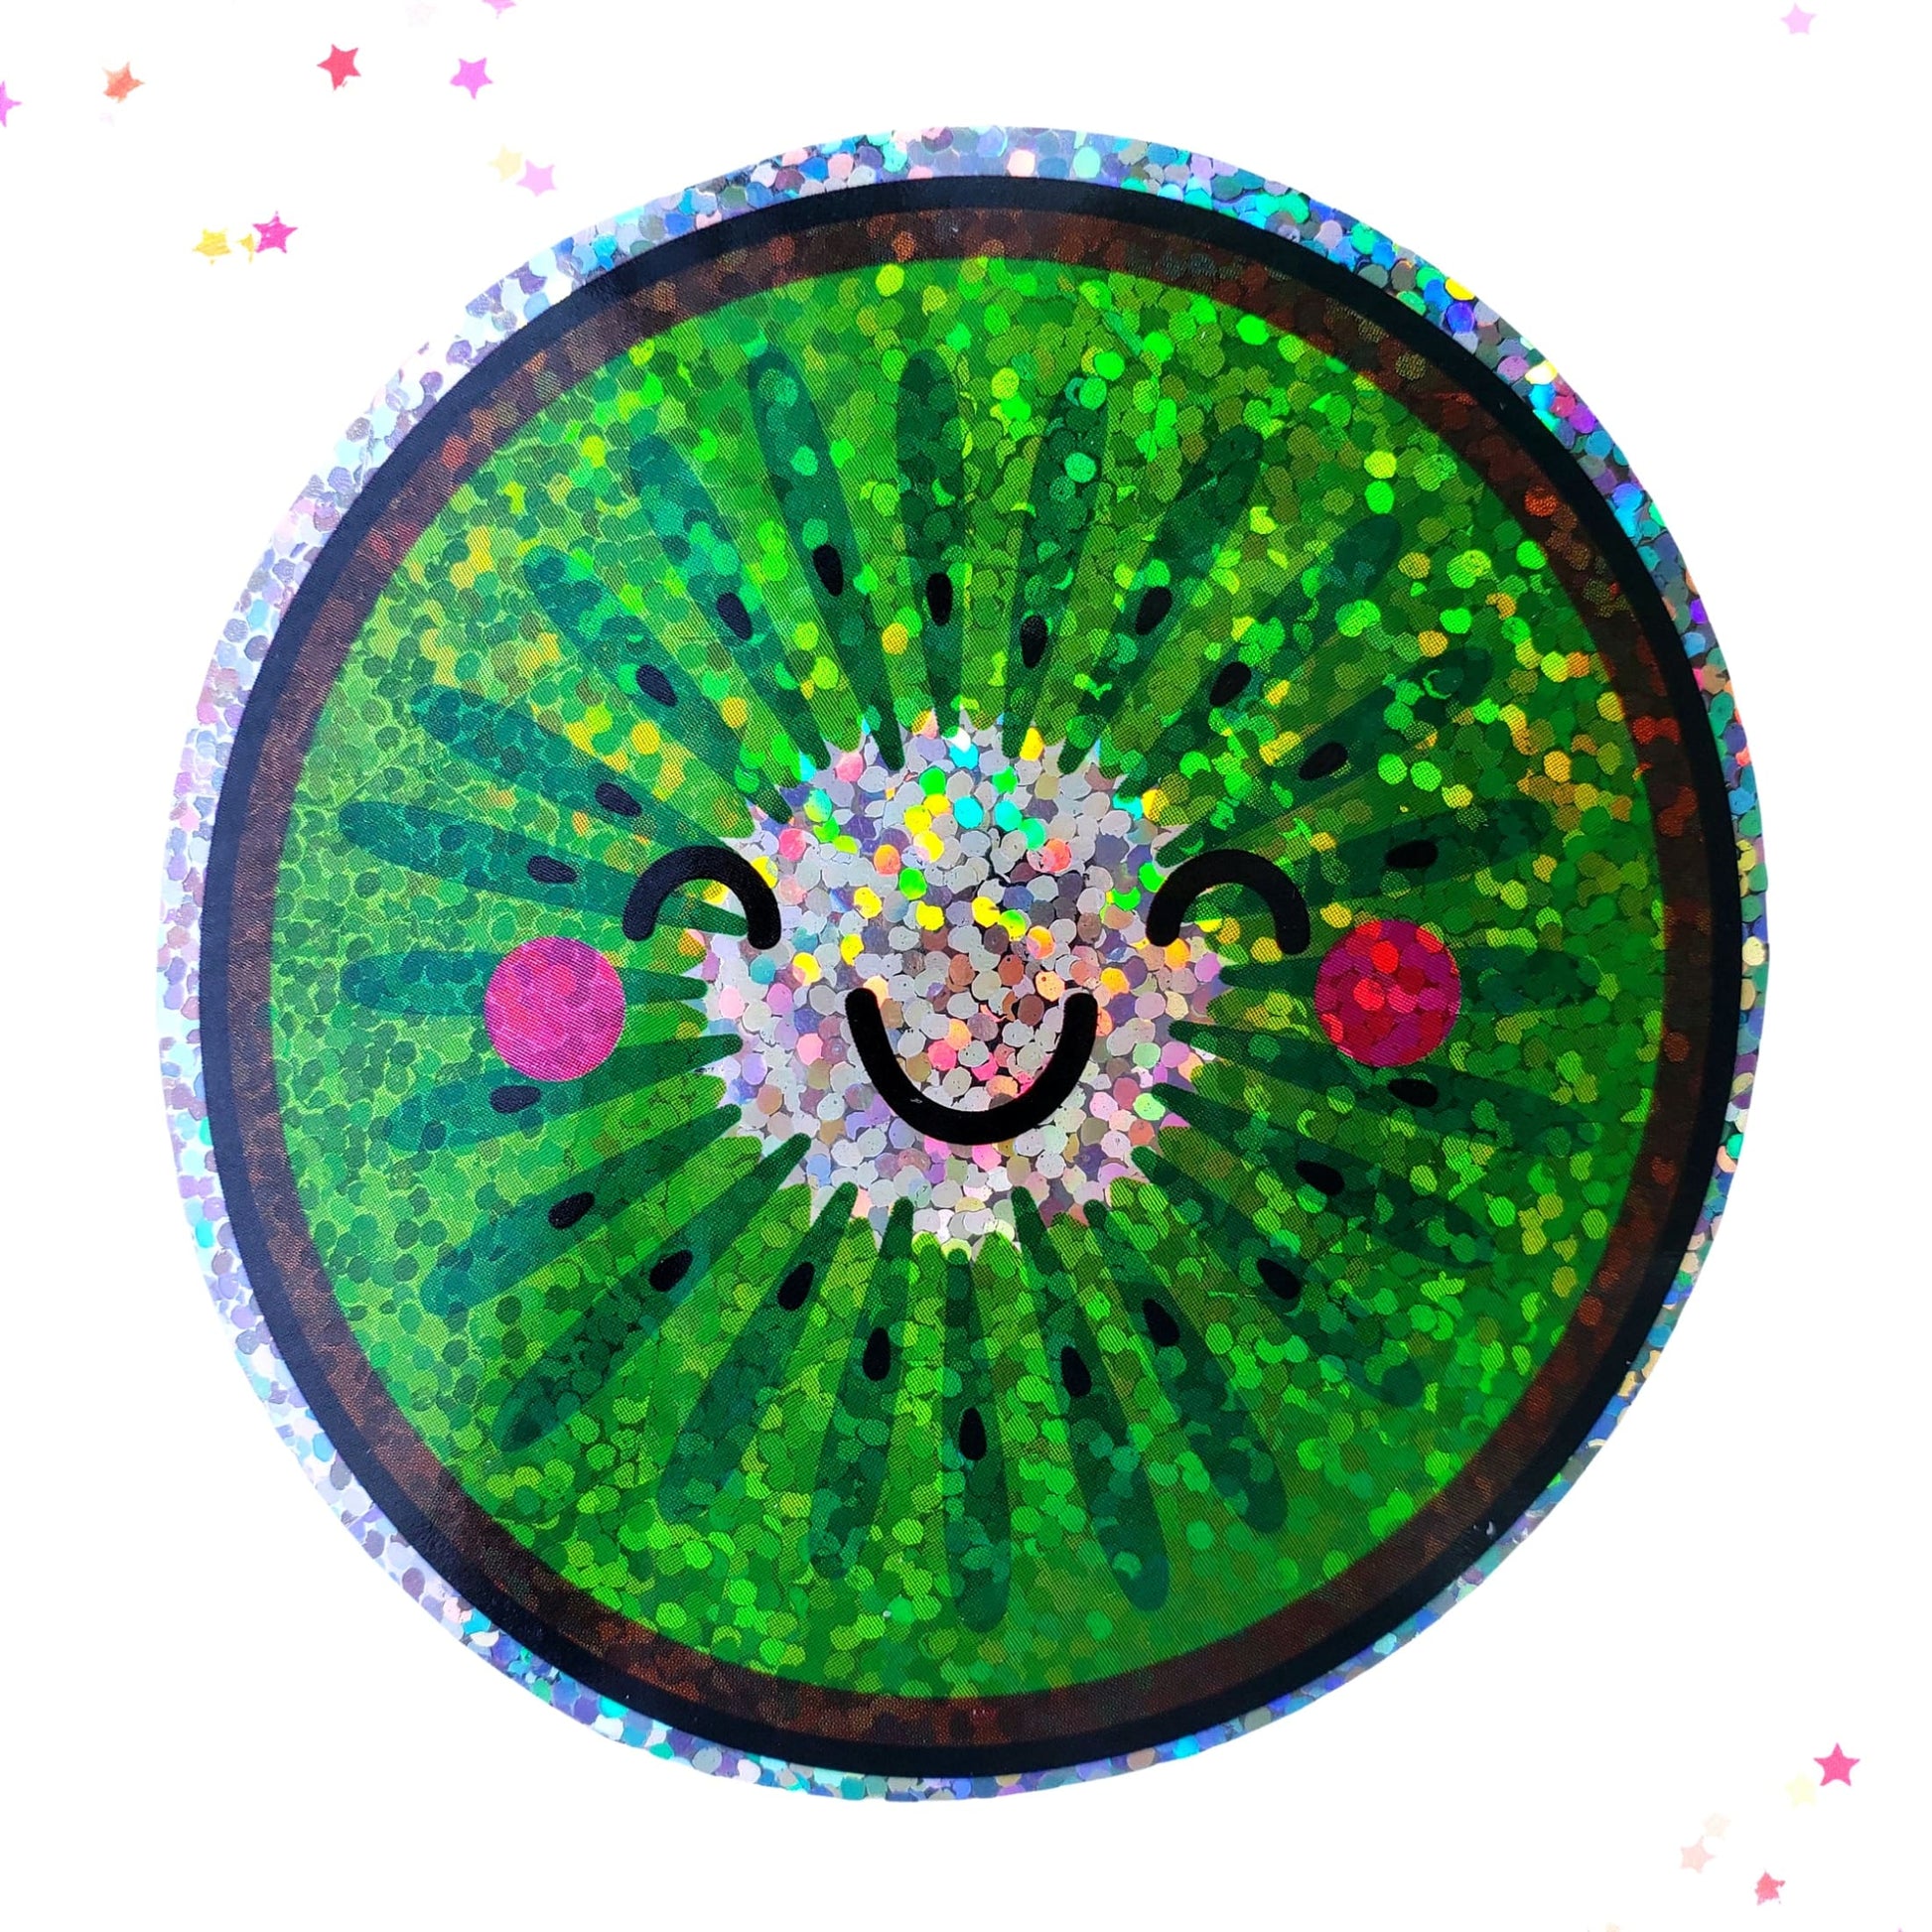 Premium Sticker - Sparkly Holographic Glitter Kawaii Kiwi from Confetti Kitty, Only 2.00